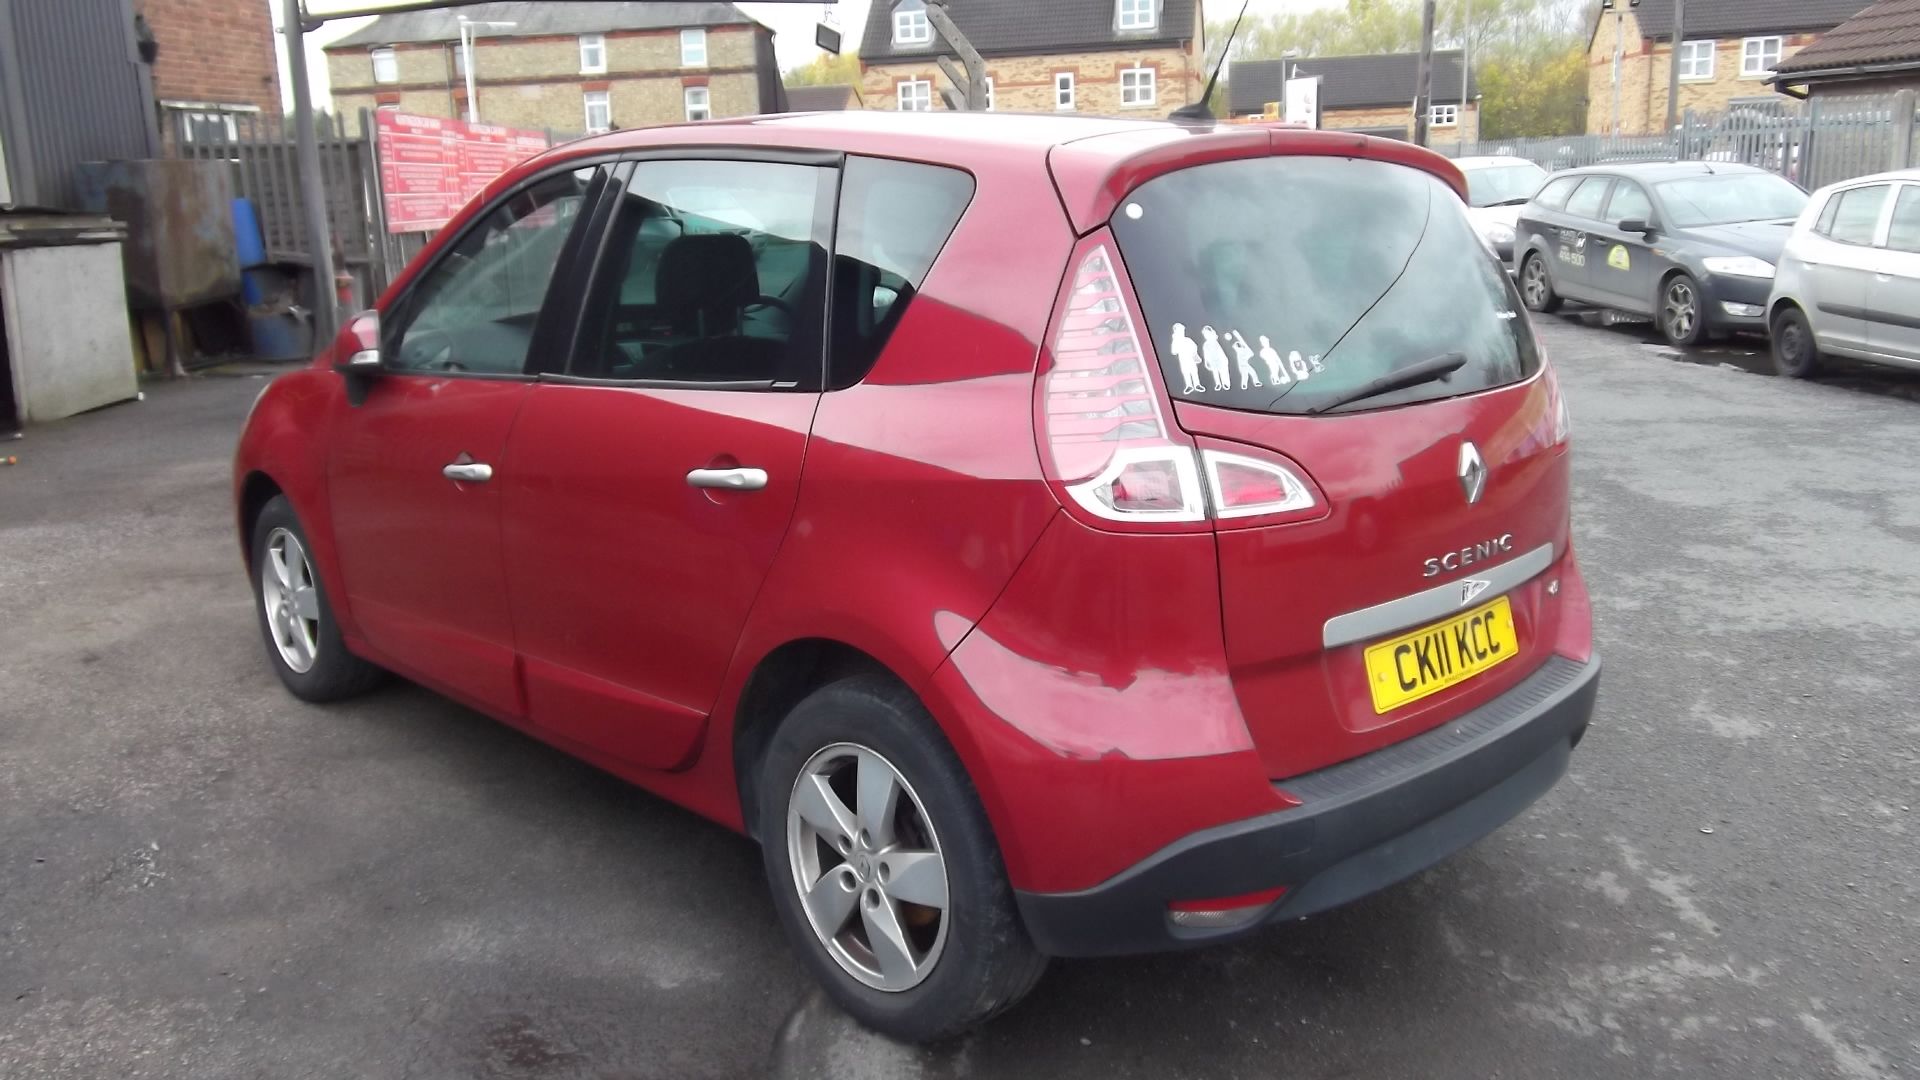 2011 Renault Scenic 1.5 DCI Dynamique Tom Tom 5 Door MPV - Image 14 of 17